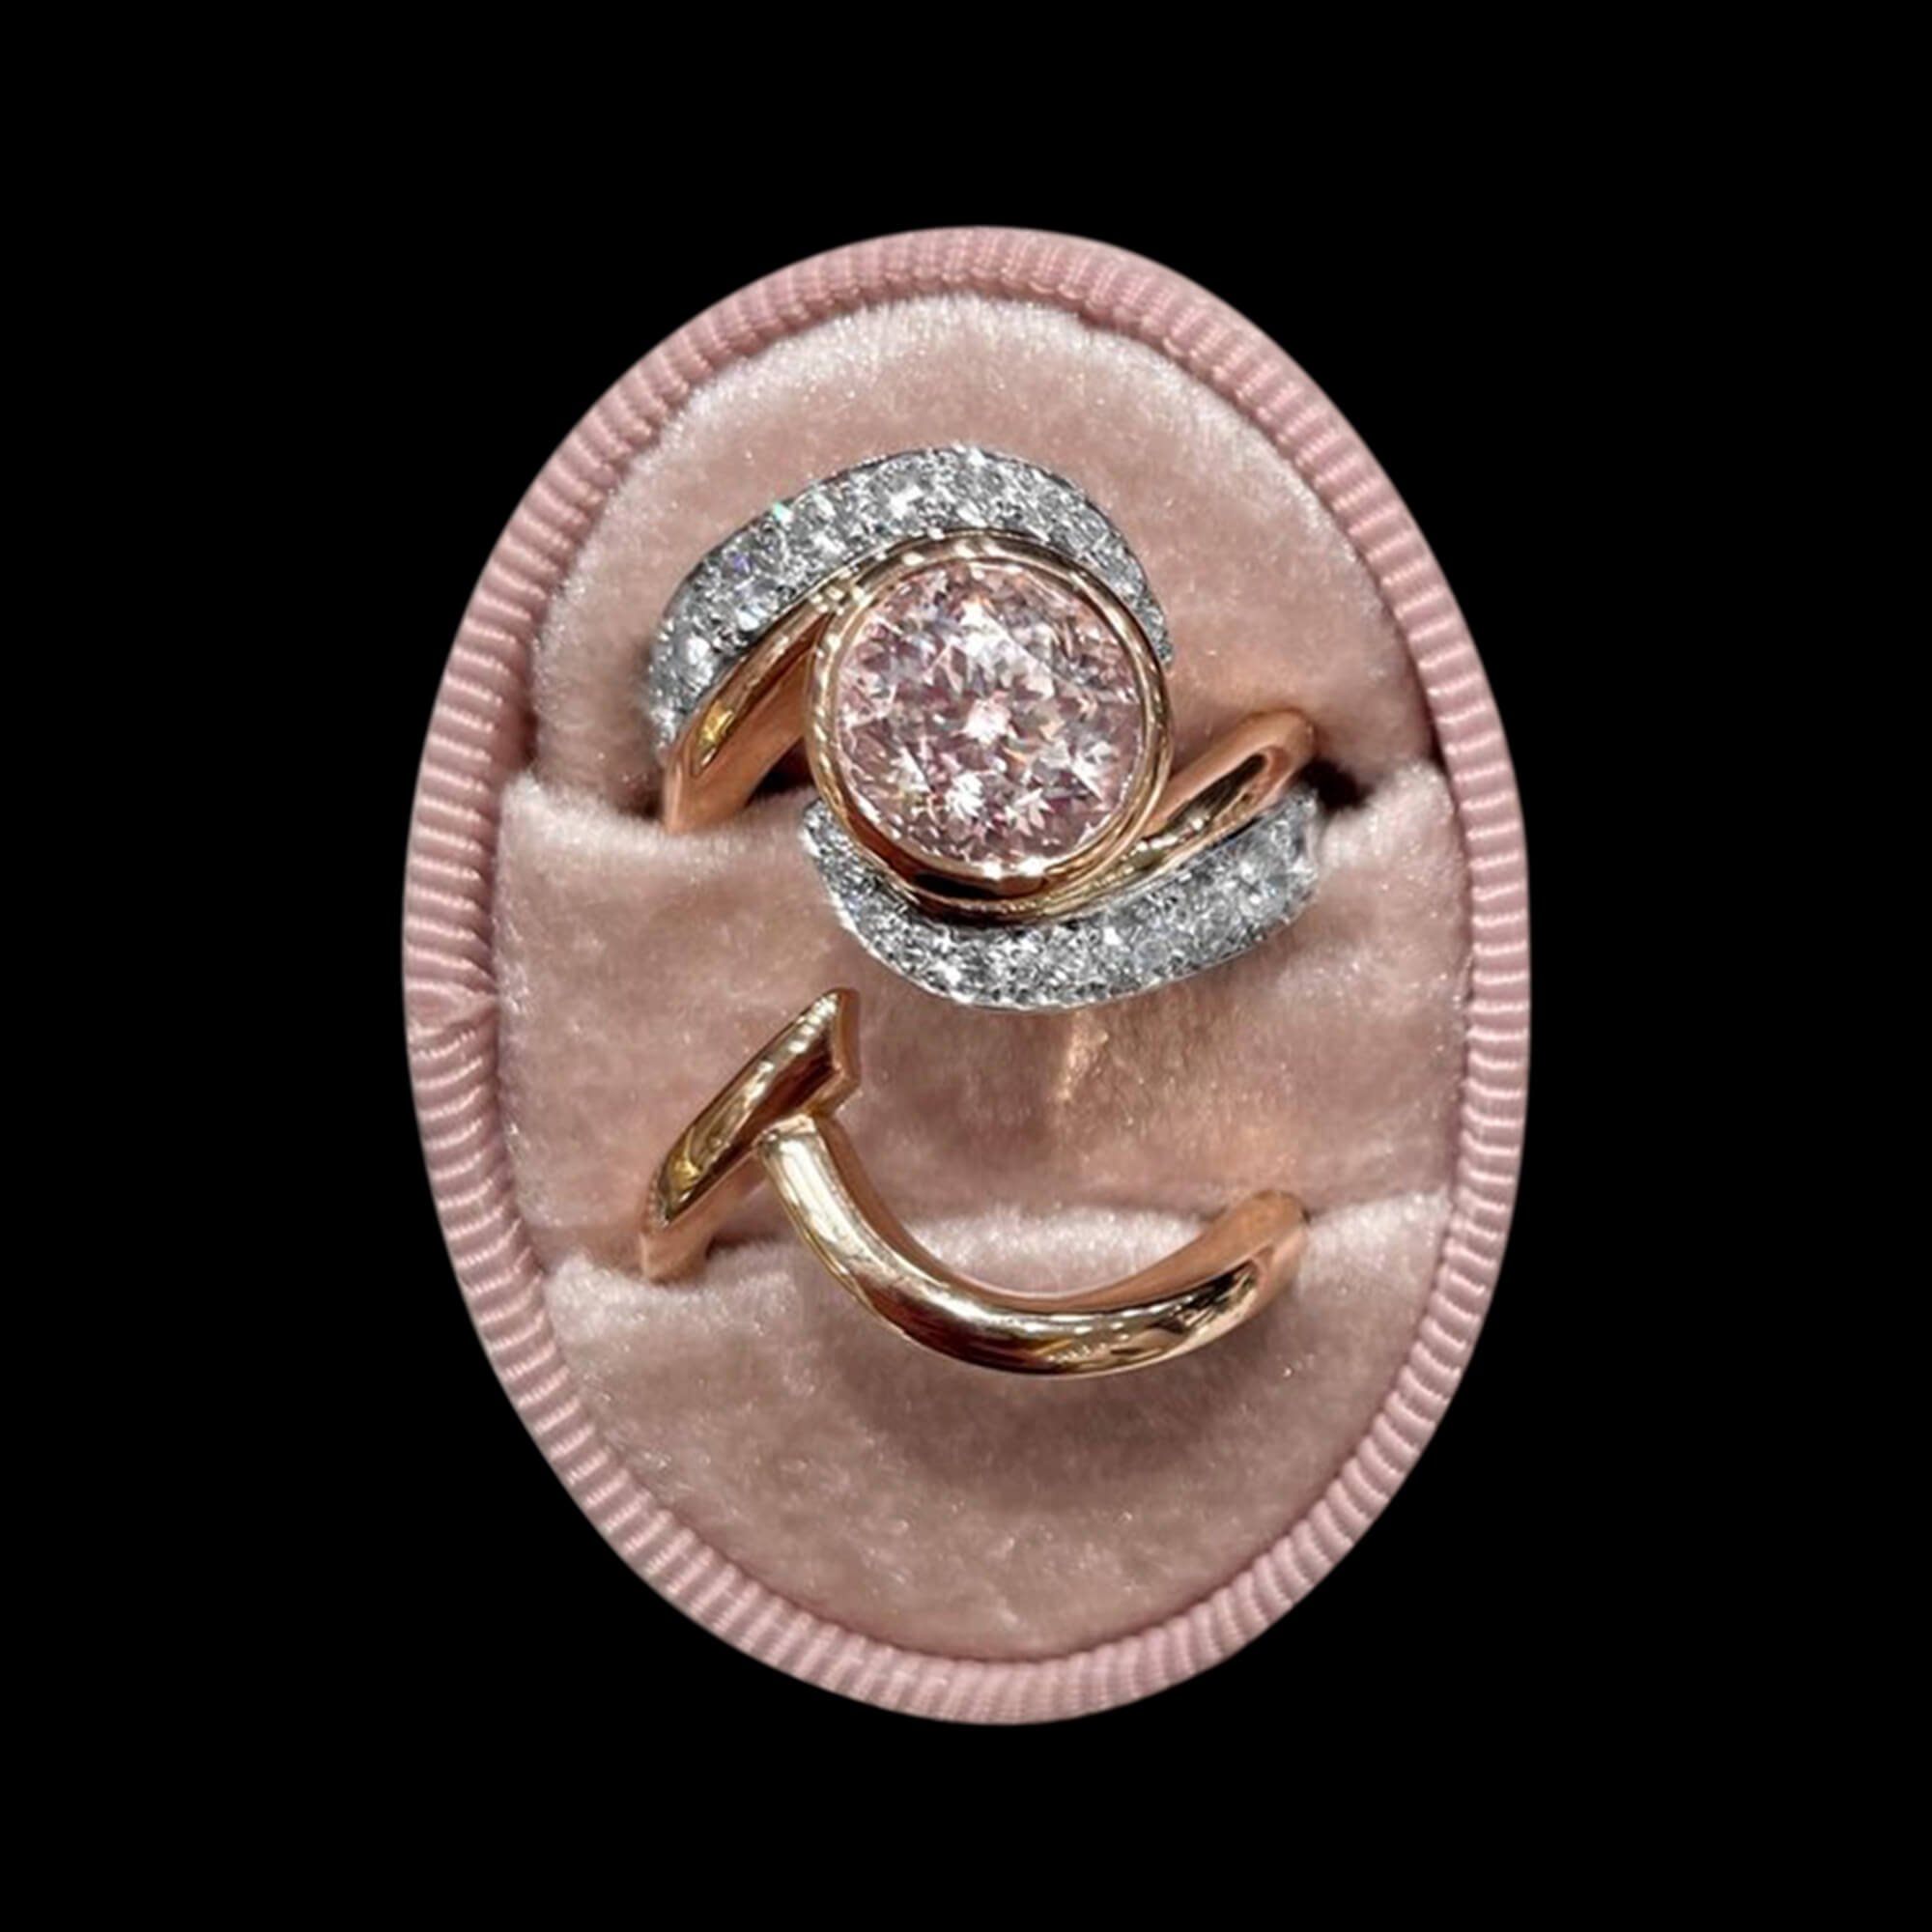 Bespoke 18kt pink and white gold engagement ring and wedding band with a pink sapphire and diamonds. FRIDA | Fine Jewellery.jpg